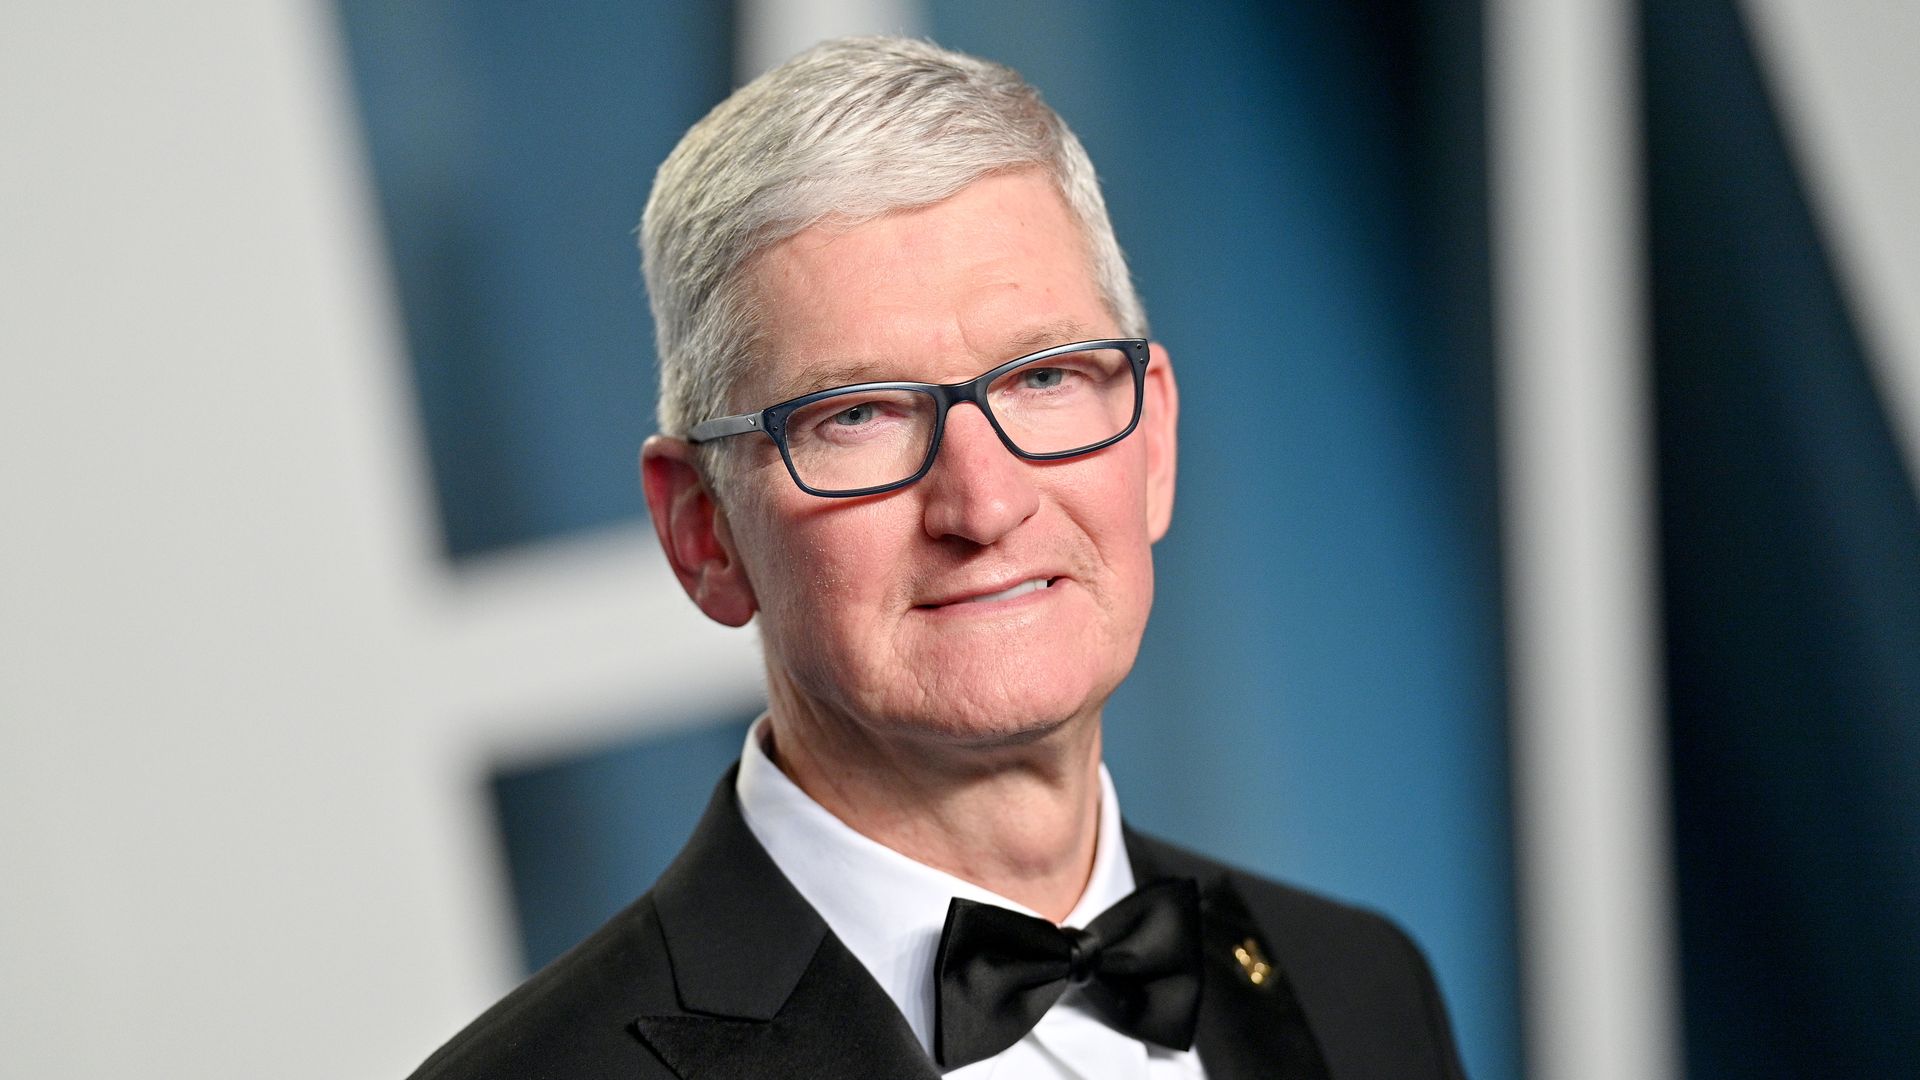 Tim Cook at the Vanity Fair Oscar Party